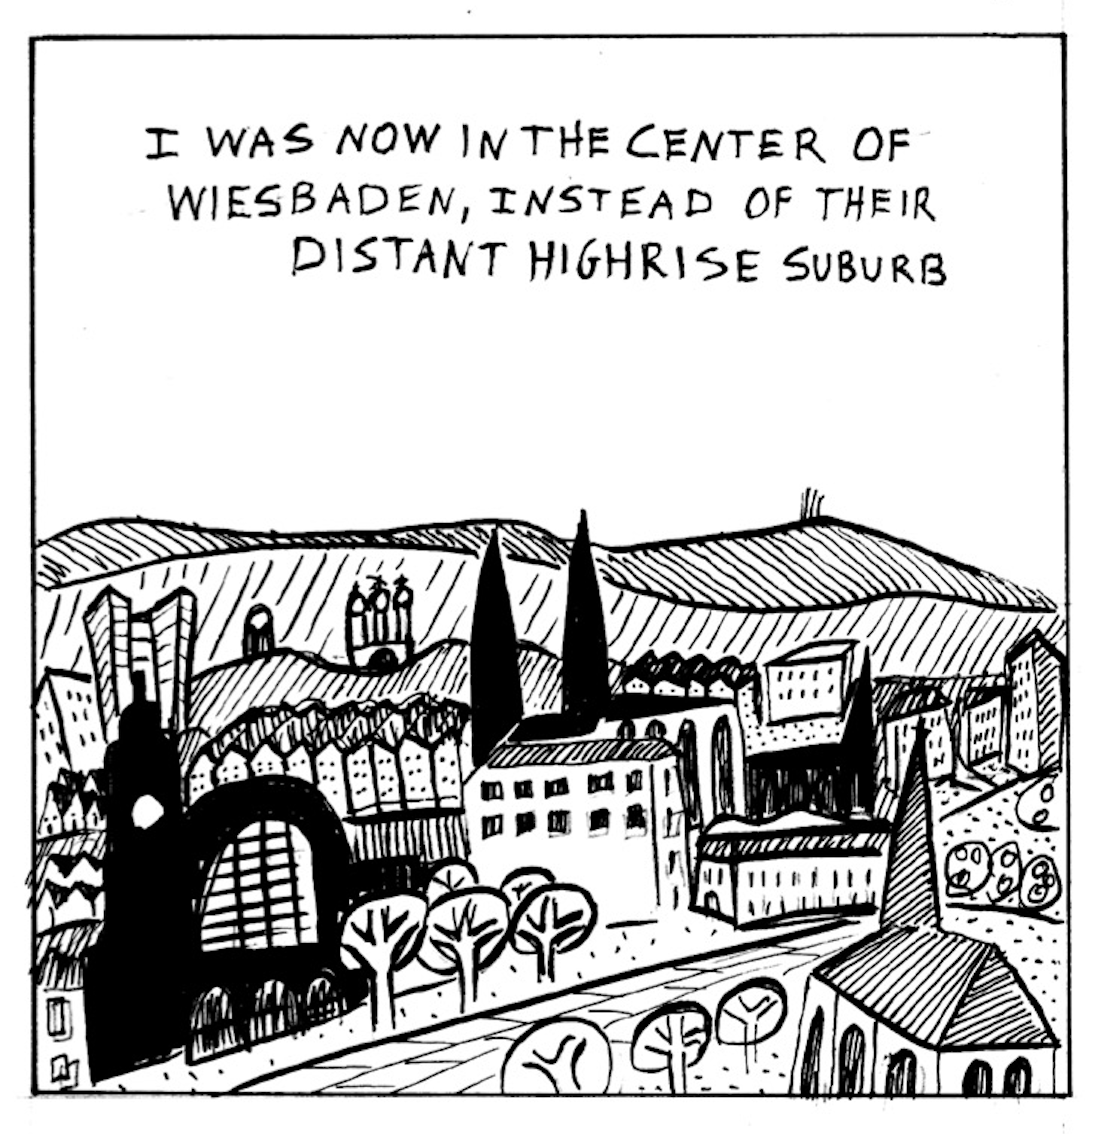 â€œI was now in the center of Wiesbaden, instead of their distant high-rise suburb.â€